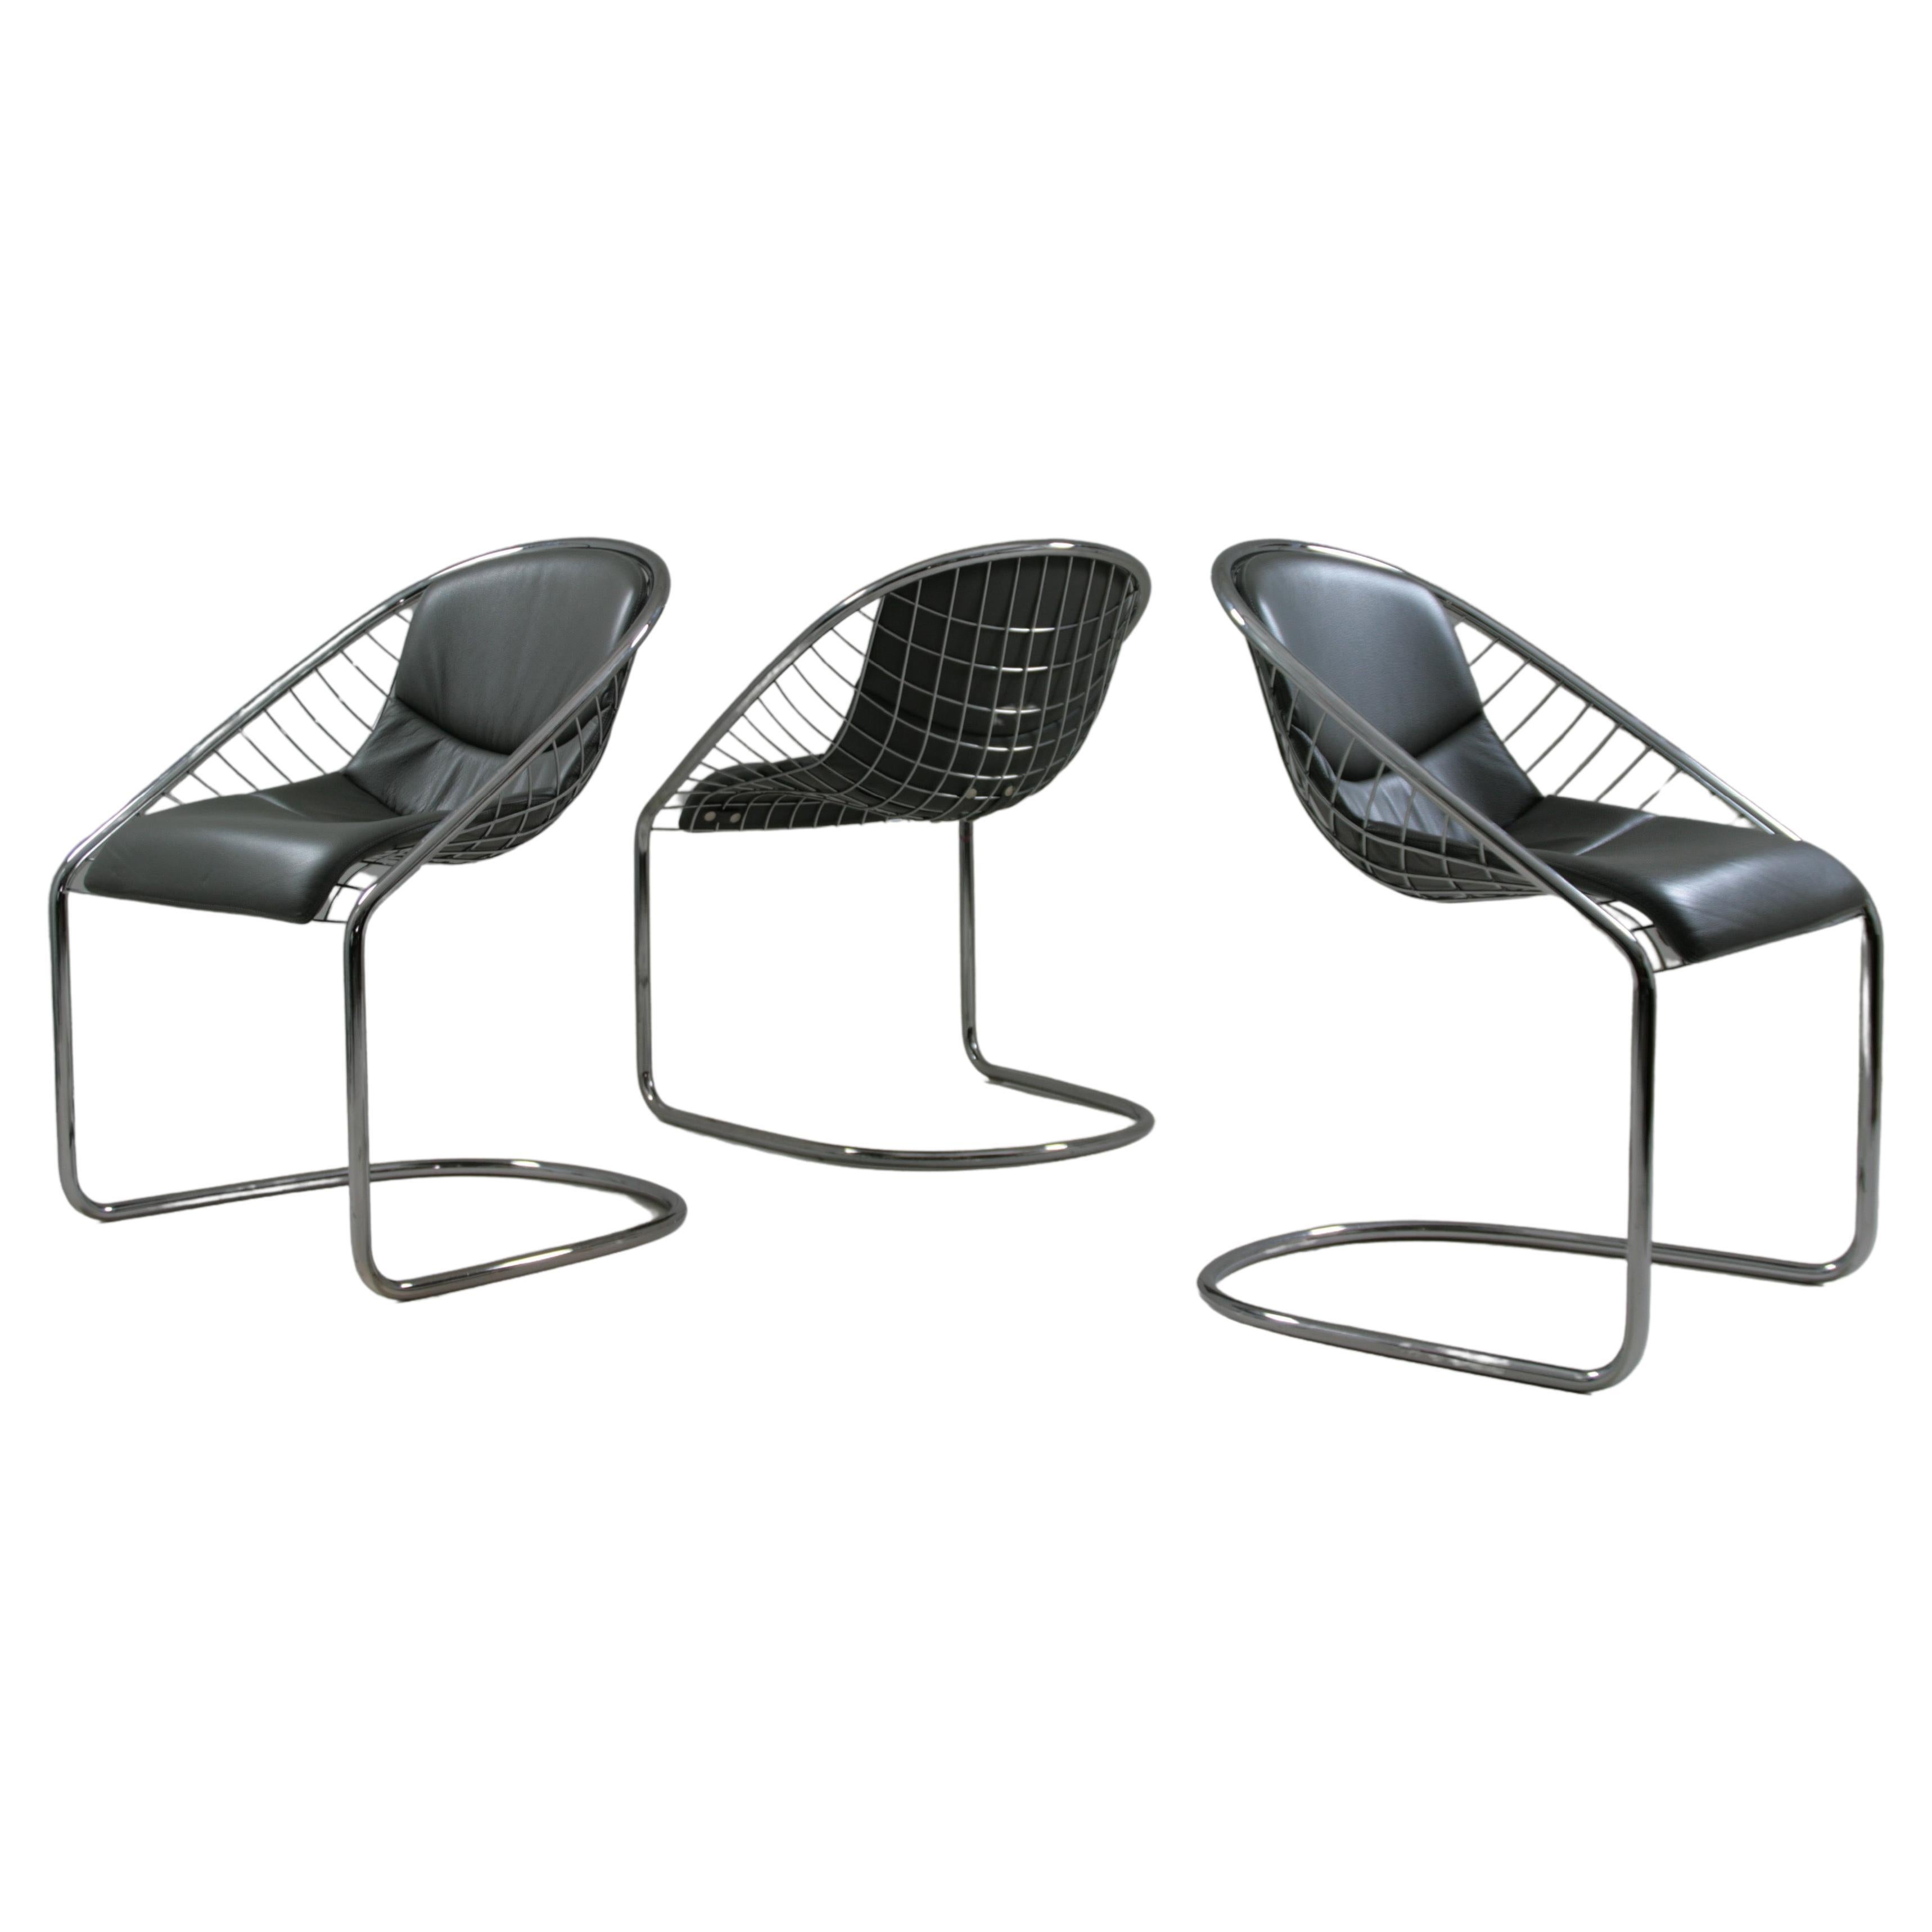 Cortina Chairs by Gordon Guillaumier for Minotti, 2000s, Set of 3